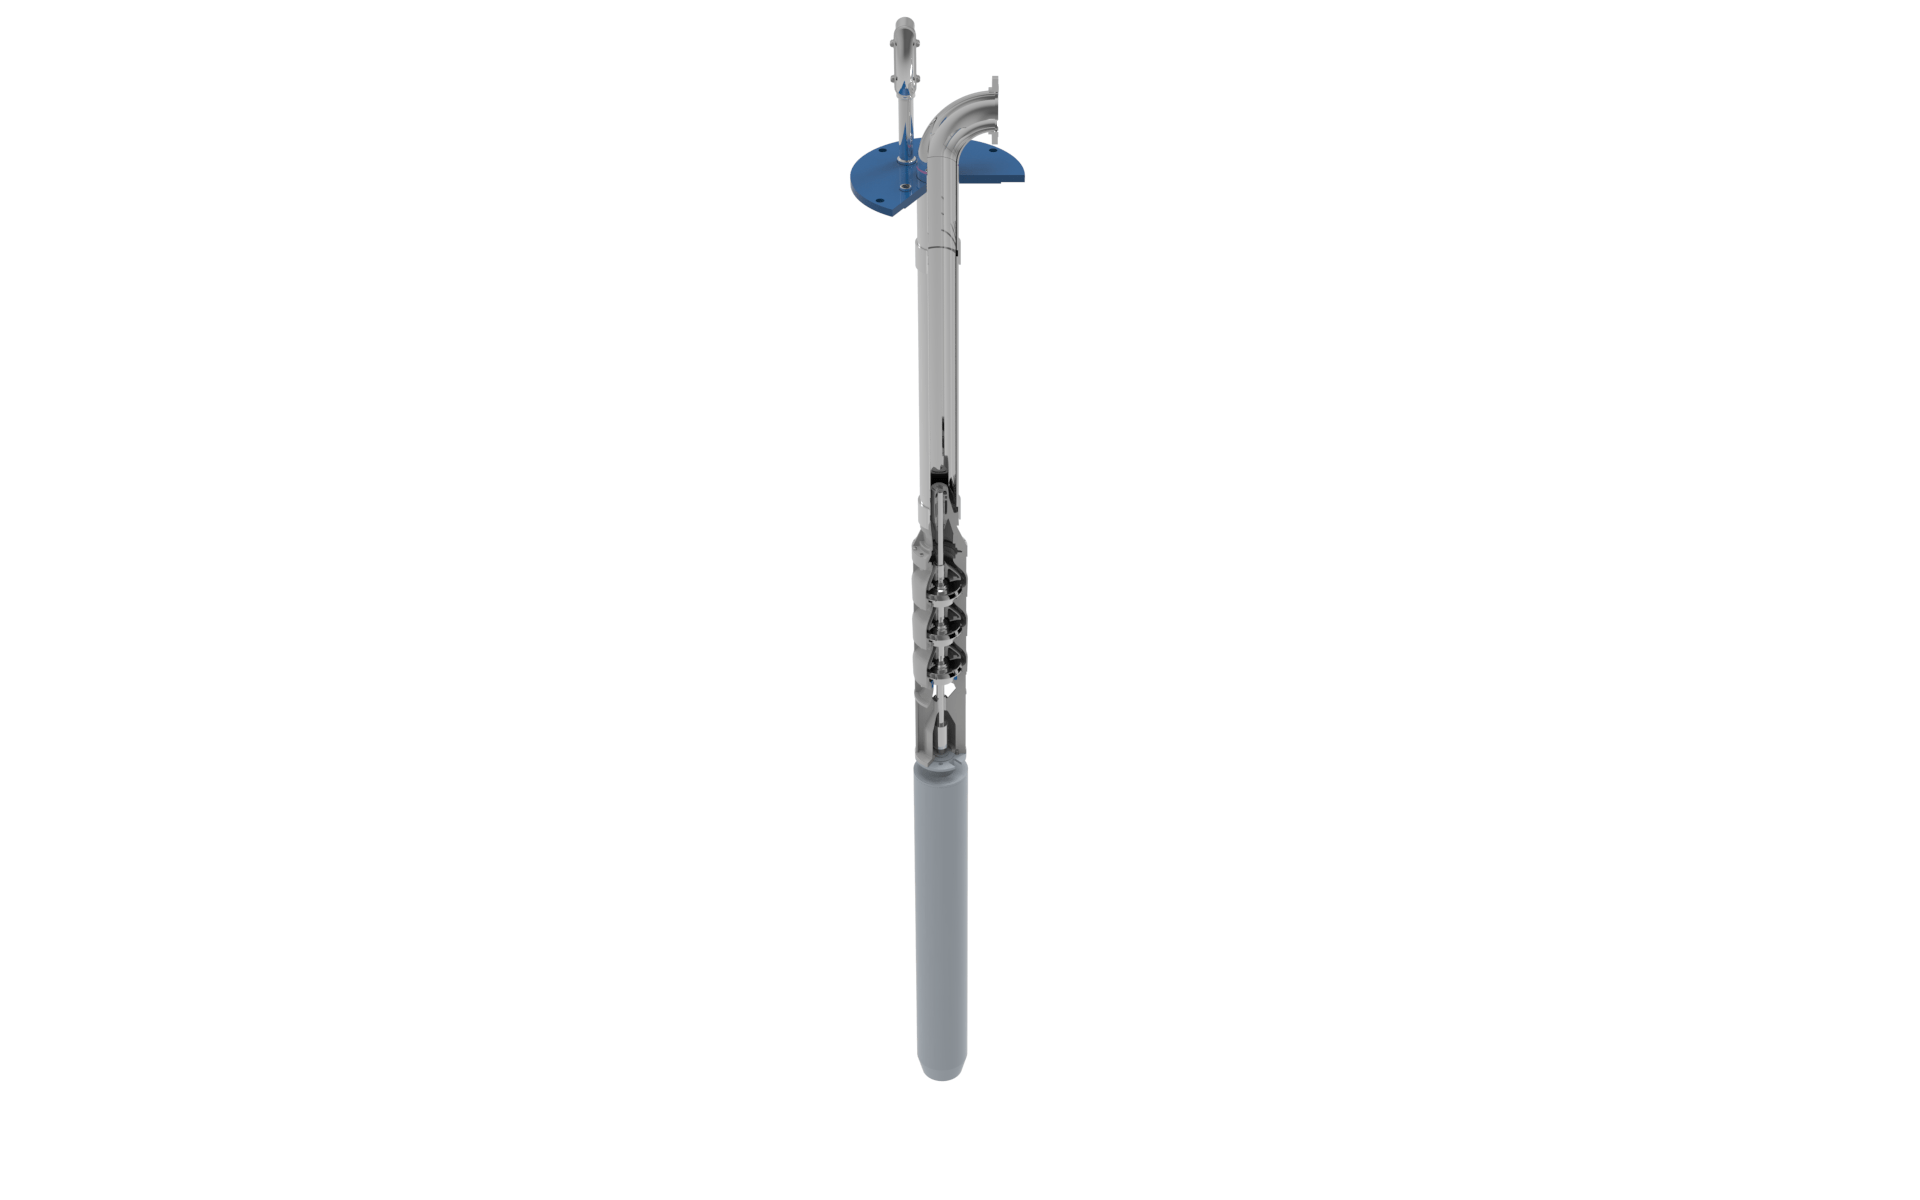 FLOWAY® VSB VERTICAL TURBINE SUBMERSIBLE PUMP left side angled view